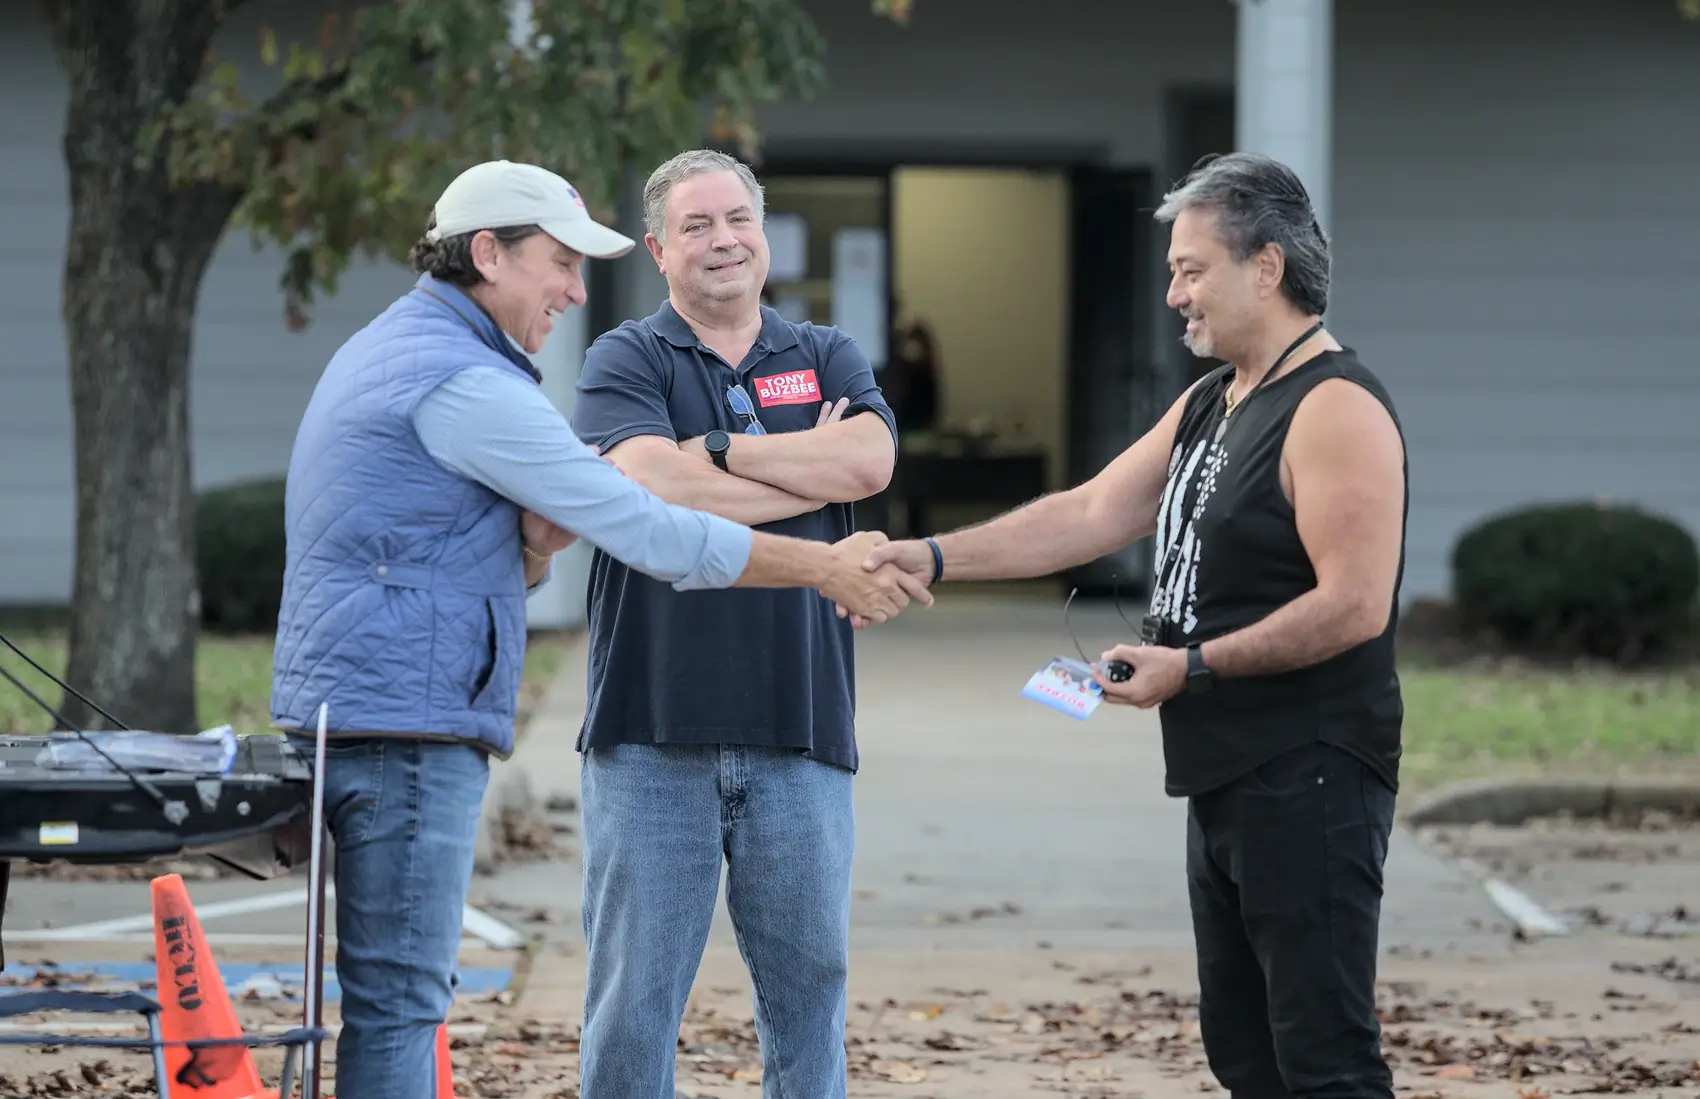 Houston City Council candidate Tony Buzbee, left, shakes hands with Zeb Apostolakis, right, outside a Harris County poll site in Nottingham Park on Election Day. Former City Councilman Greg Travis, center, supports Buzbee's campaign to oust incumbent Mary Nan Huffman.